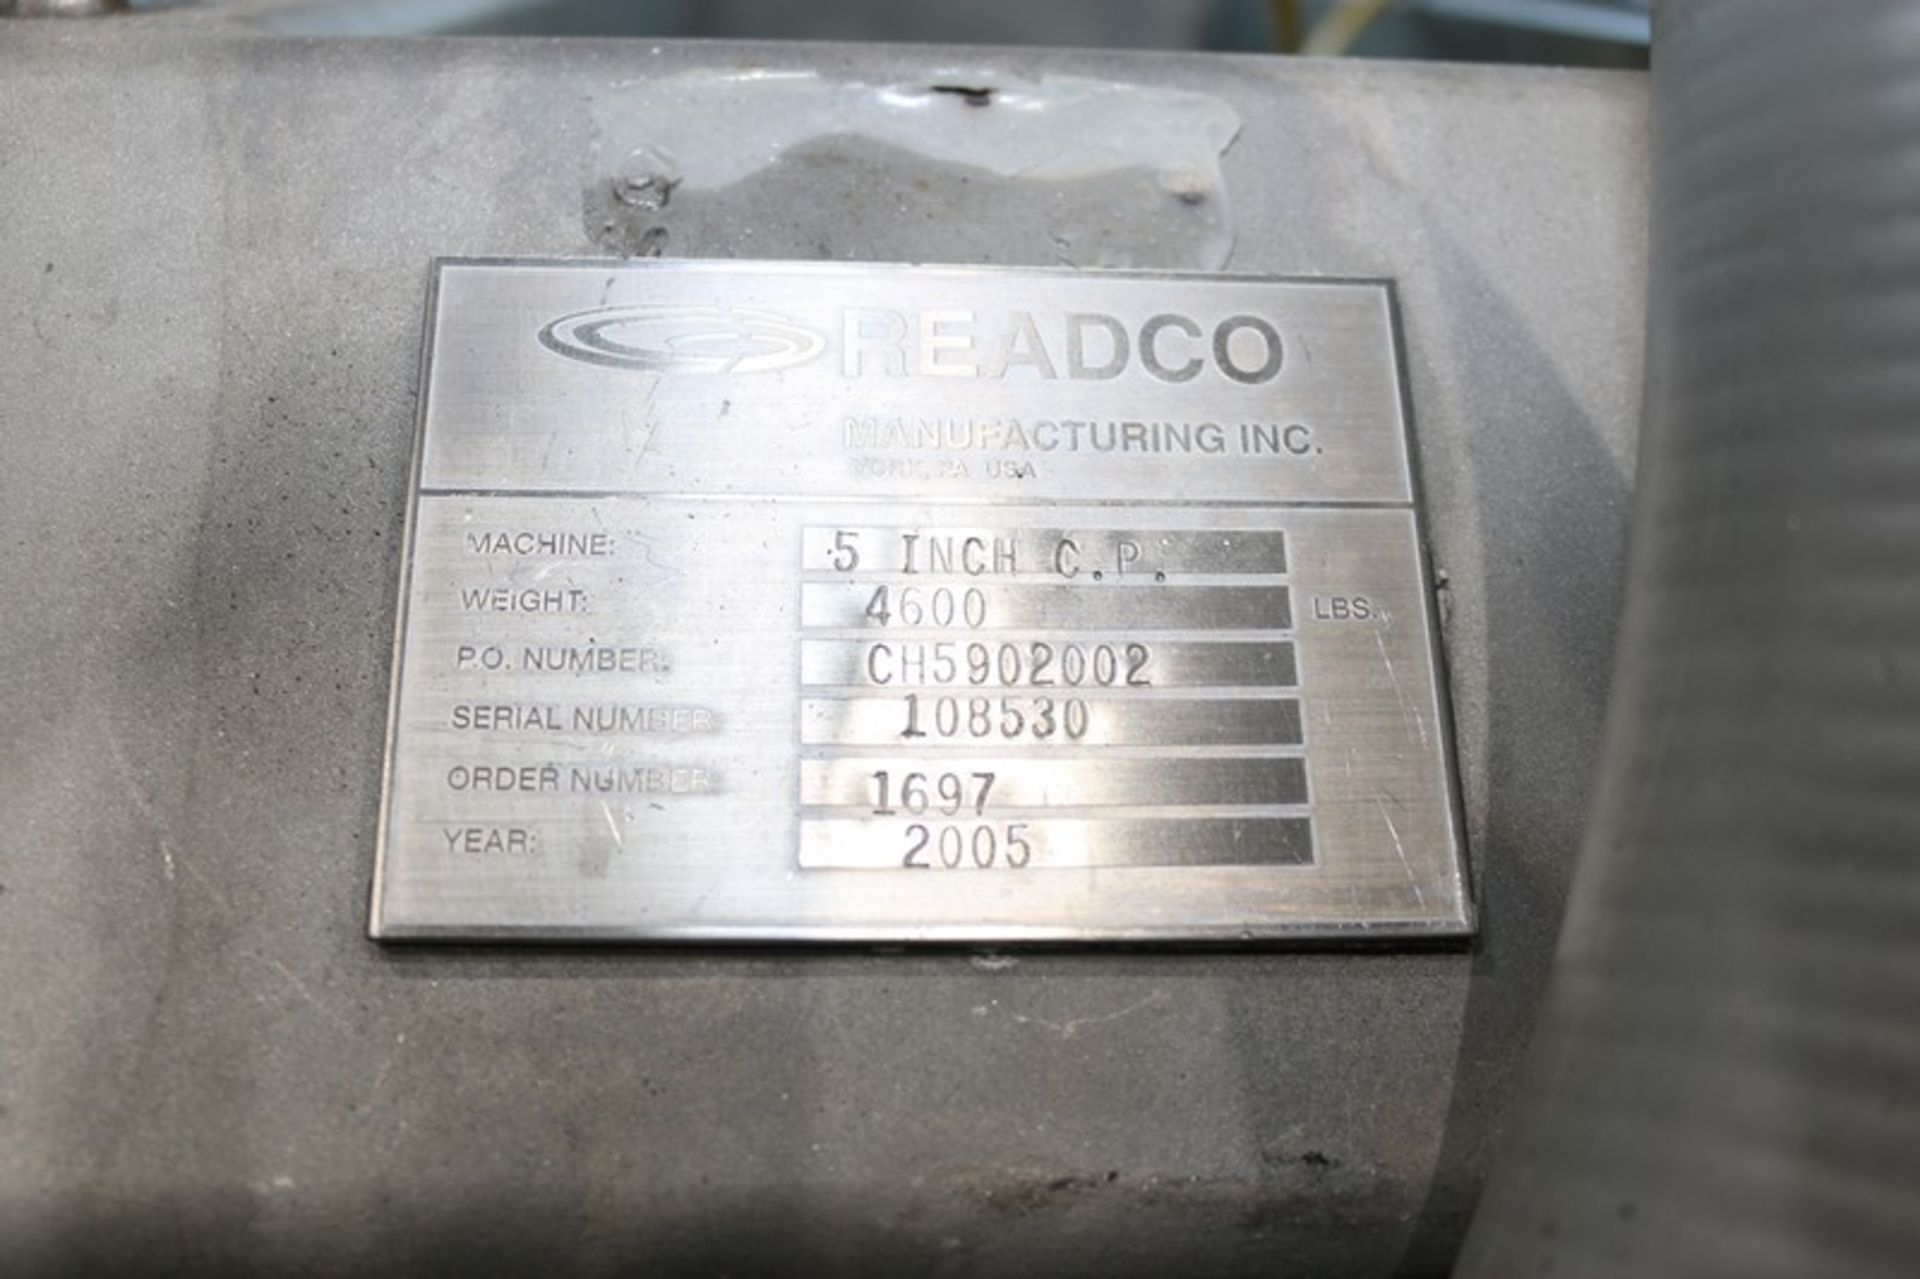 2005 Readco S/S Extruder, Machine 5 Inch C.P., S/N 108530, with Some S/S Spare Parts, Includes (2) - Image 7 of 9